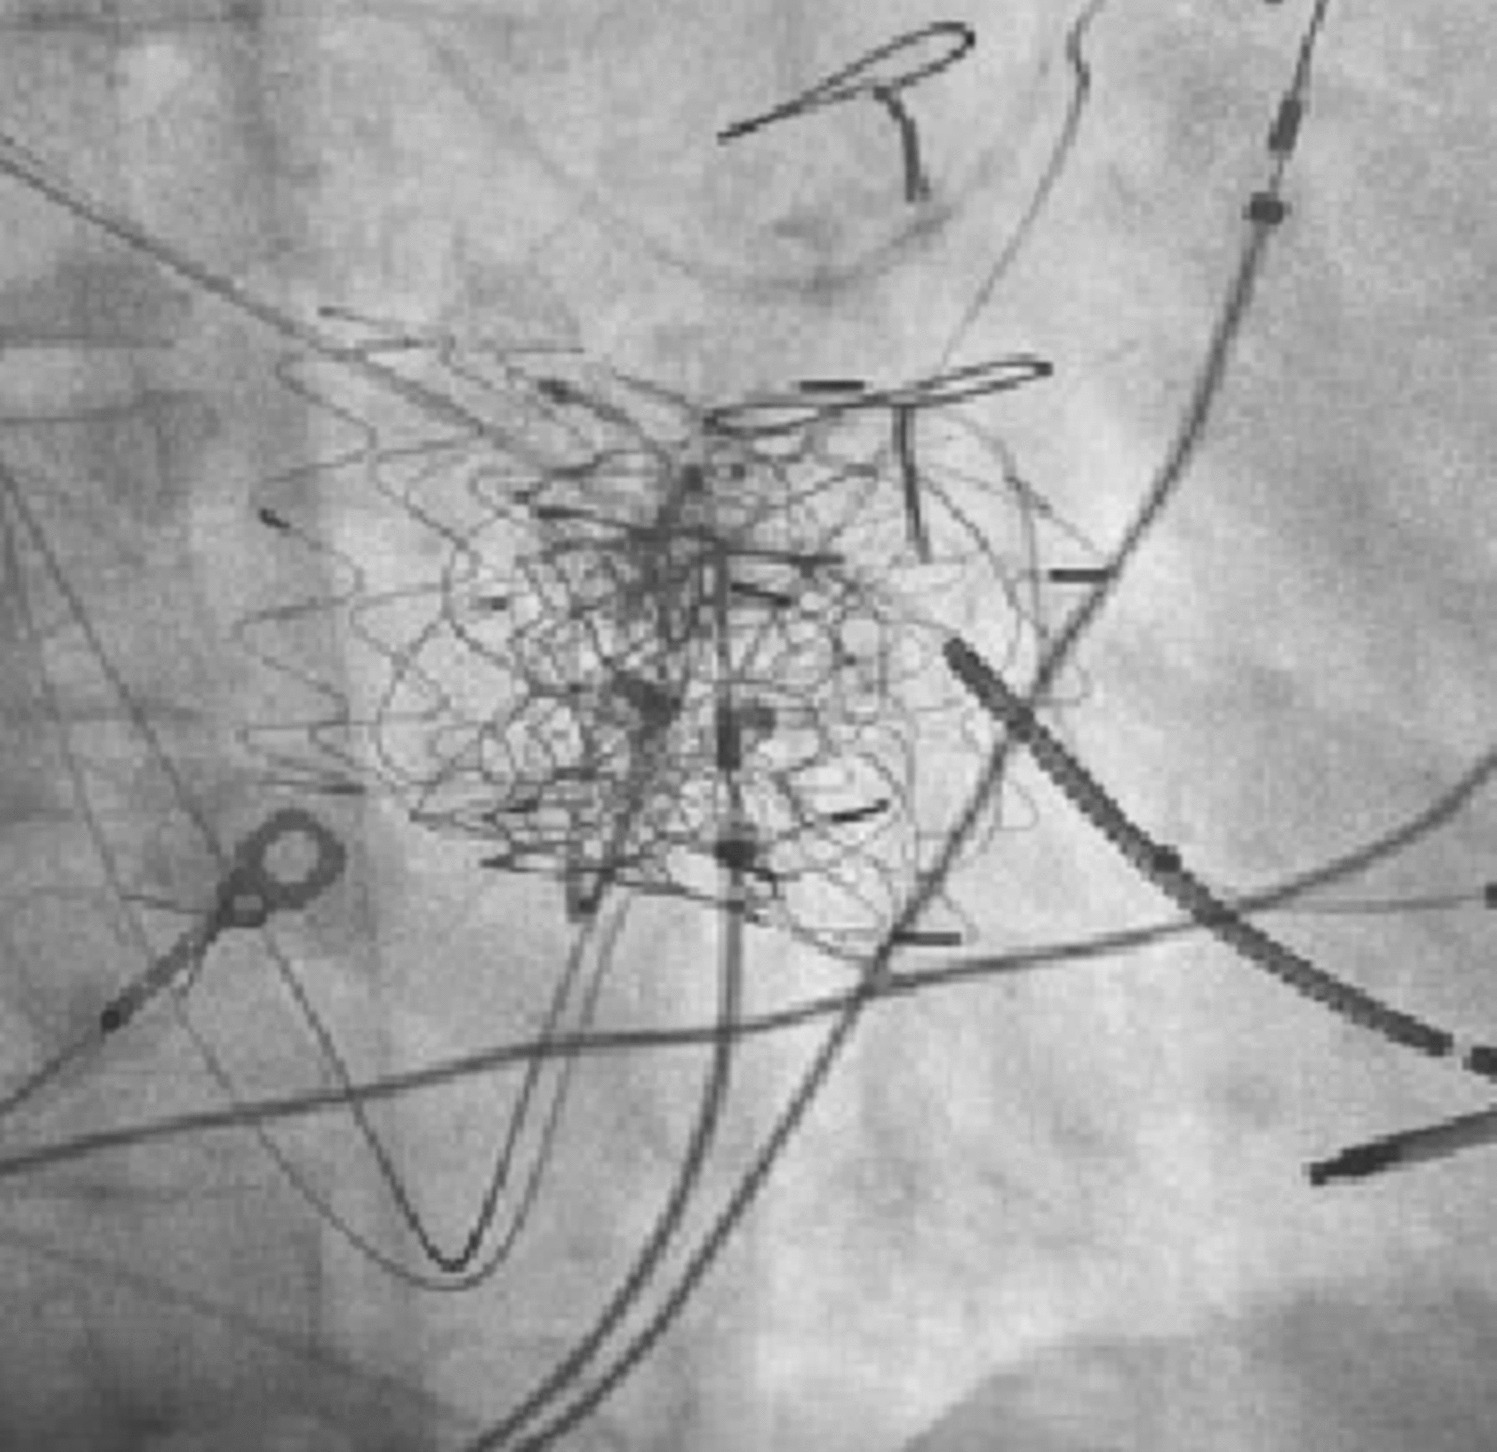 Pacing and Defibrillation Consideration in the Era of Transcatheter Tricuspid Valve Replacement